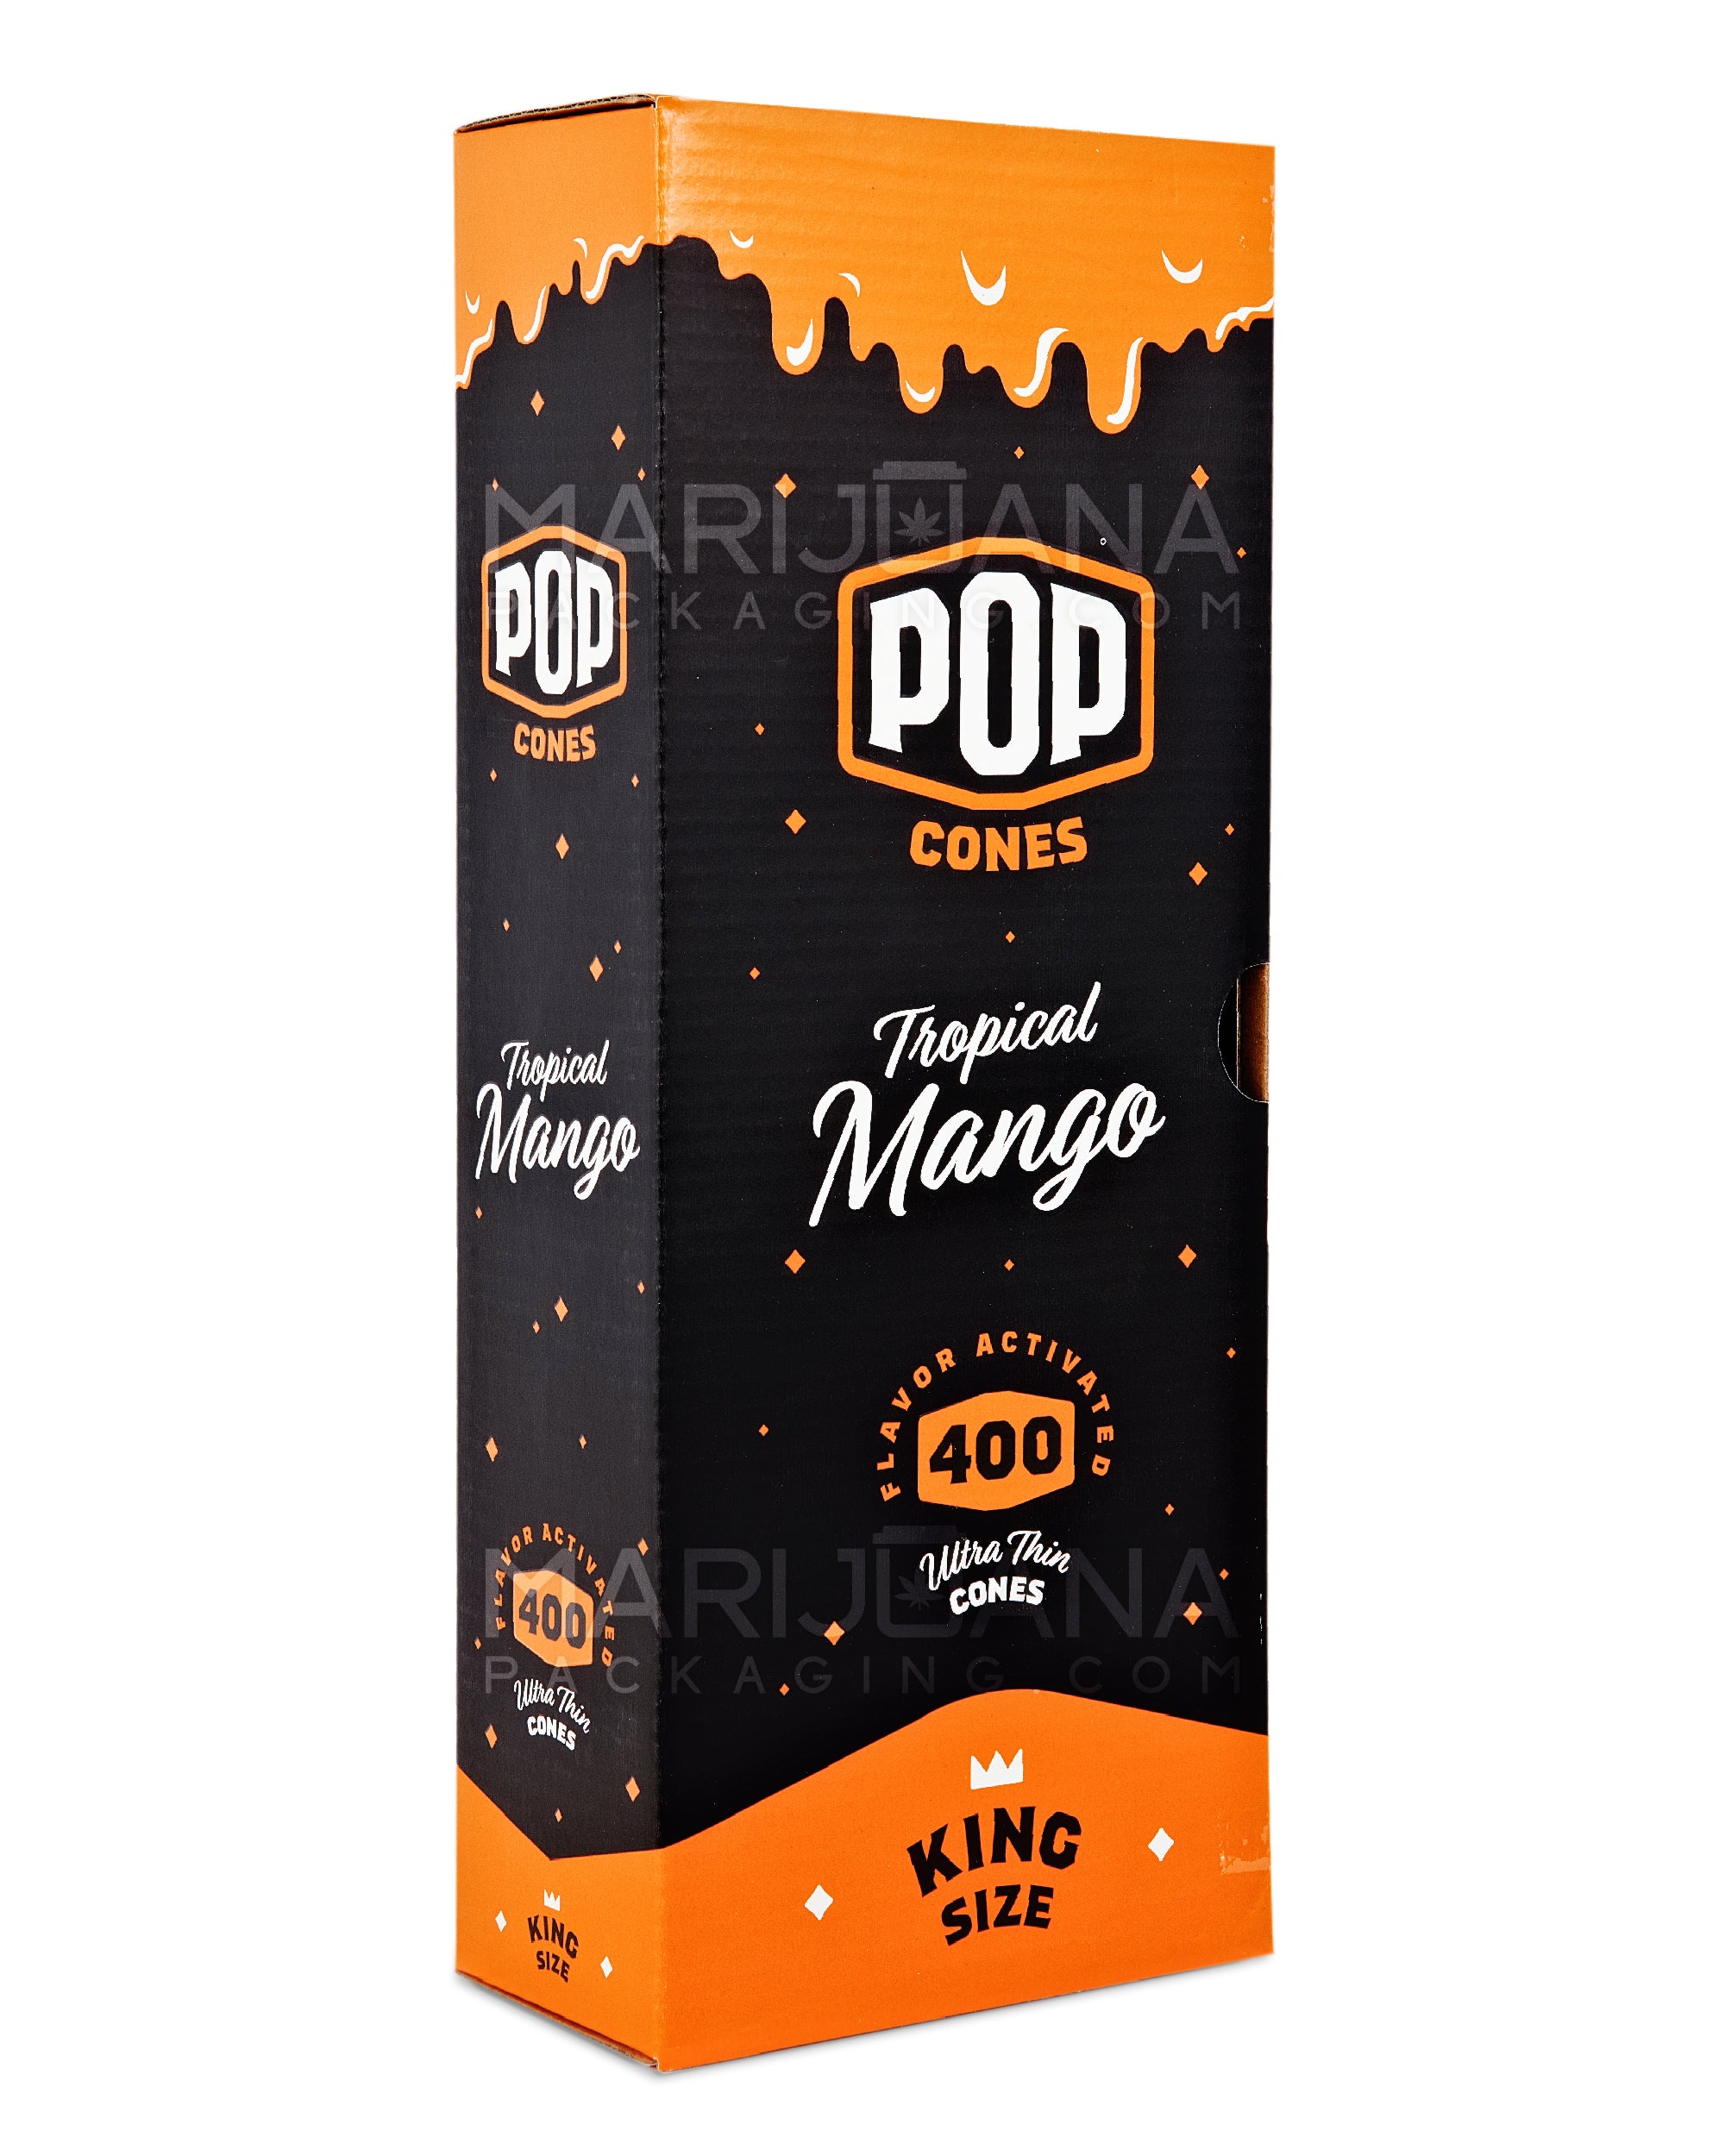 POP CONES | King Size Unbleached Pre-Rolled Cones | 109mm - Tropical Mango - 400 Count - 1